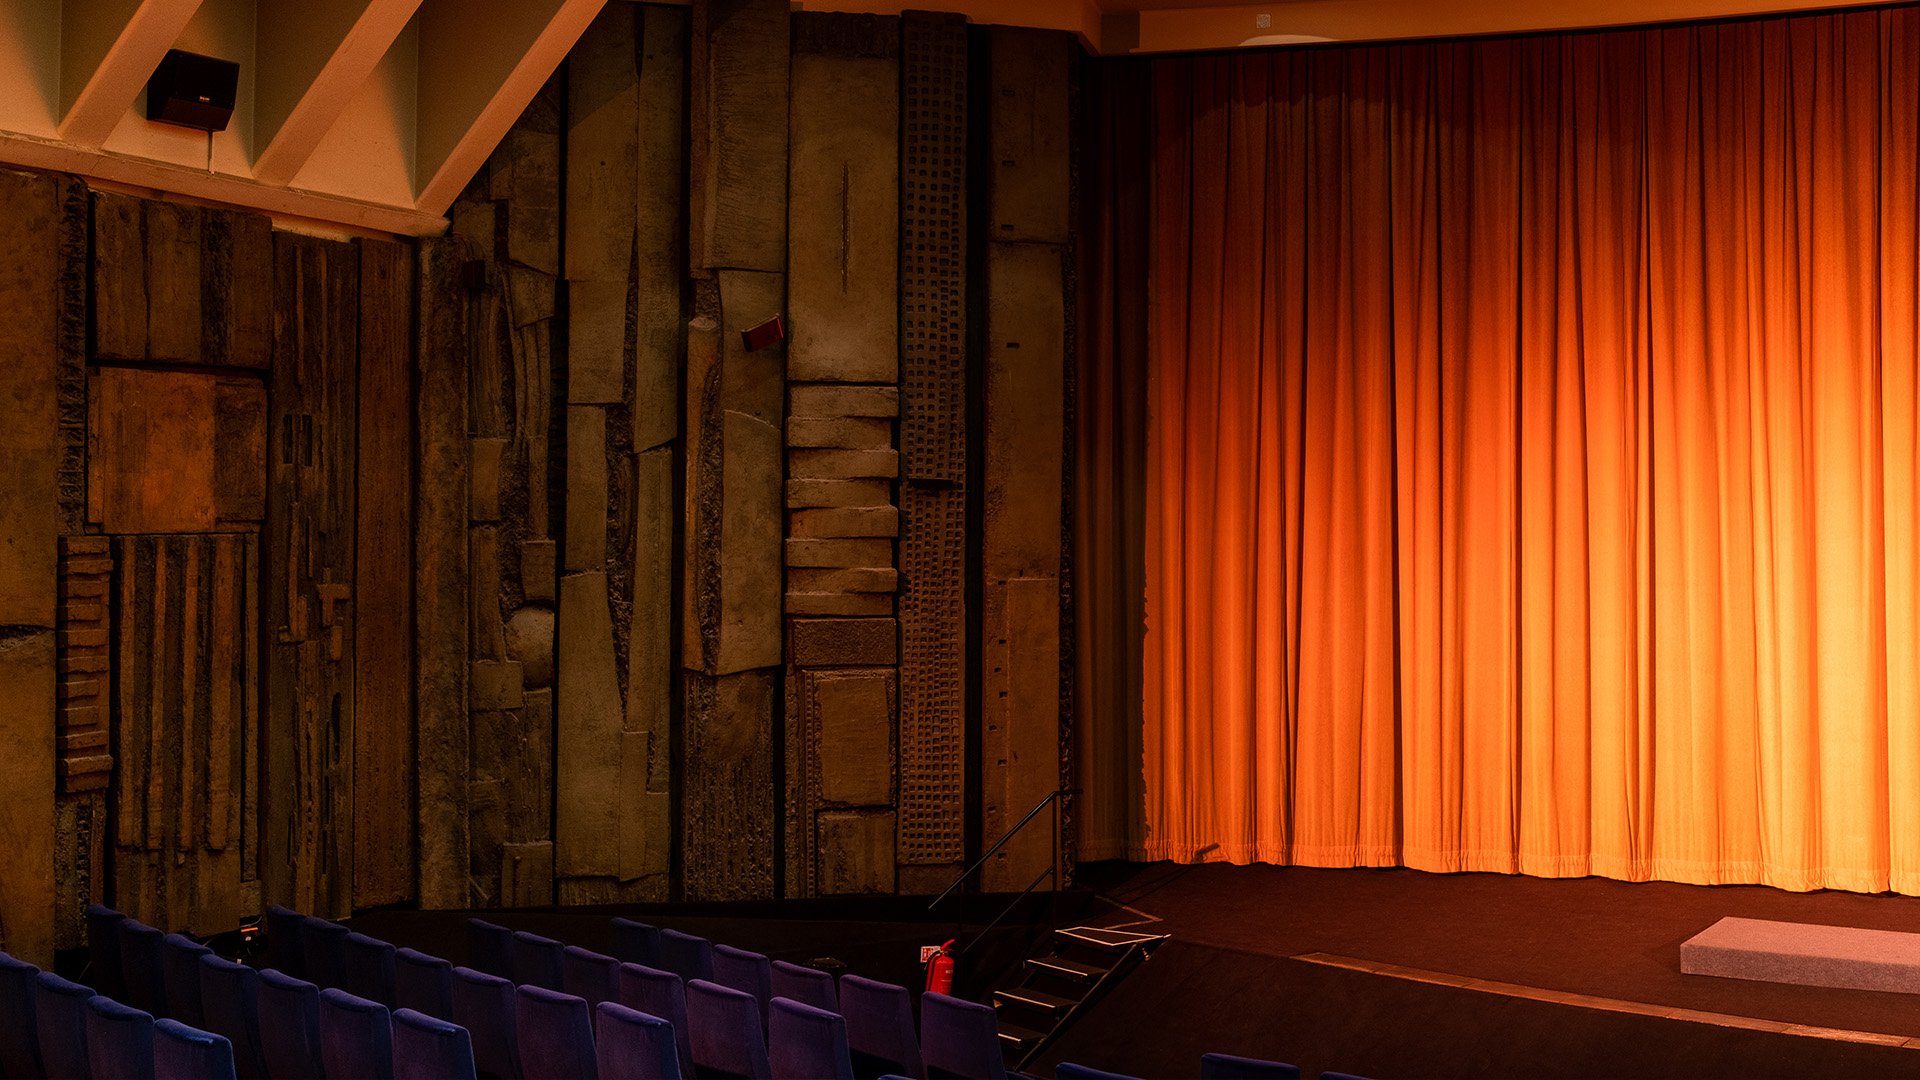 Londoners fight to save iconic Curzon Mayfair cinema which has entertained locals for 88 years